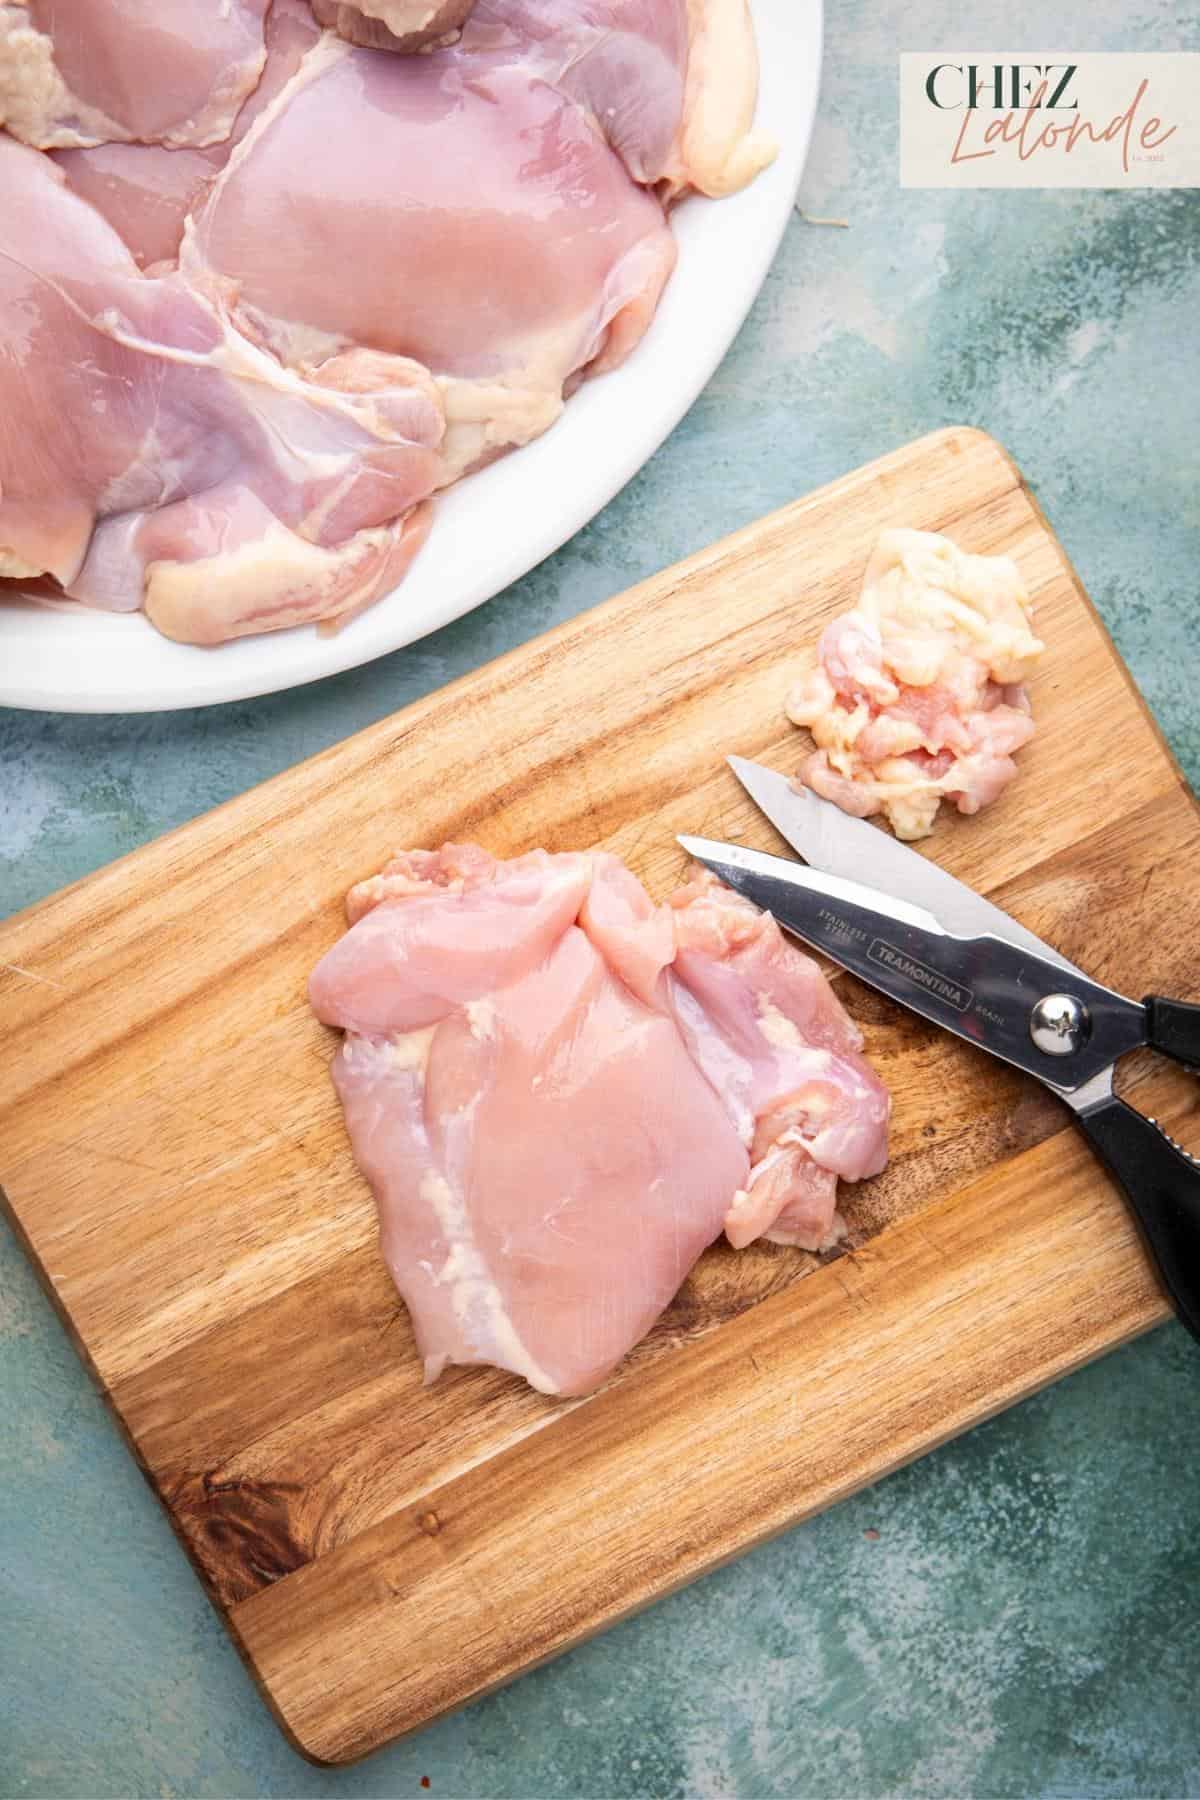 This is what the chicken thigh suppose to look like after cleaning and trimming.